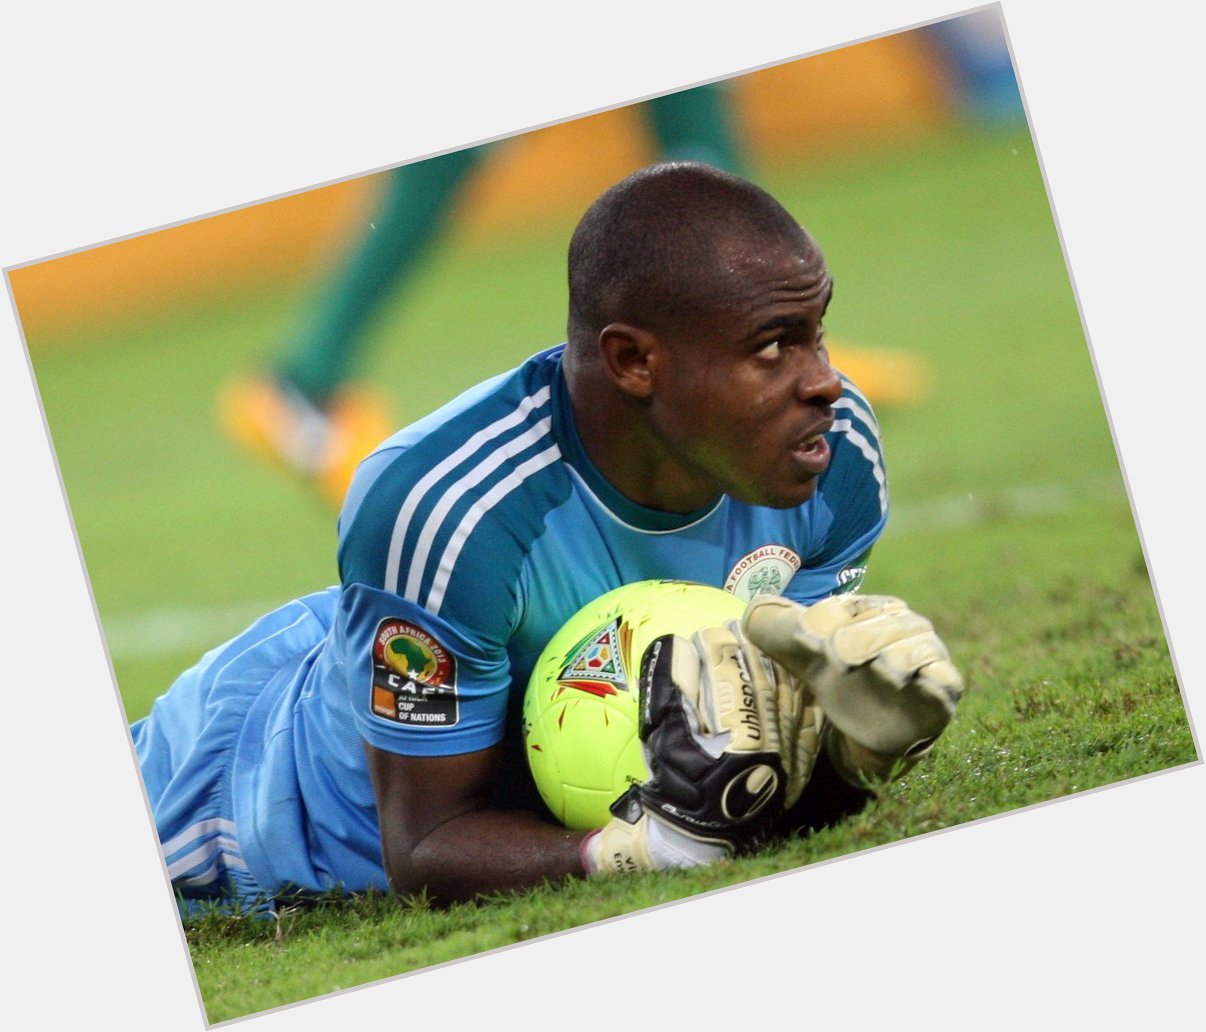 Happy birthday to a former superb goalie, Vincent Enyeama. Have a blast!! 